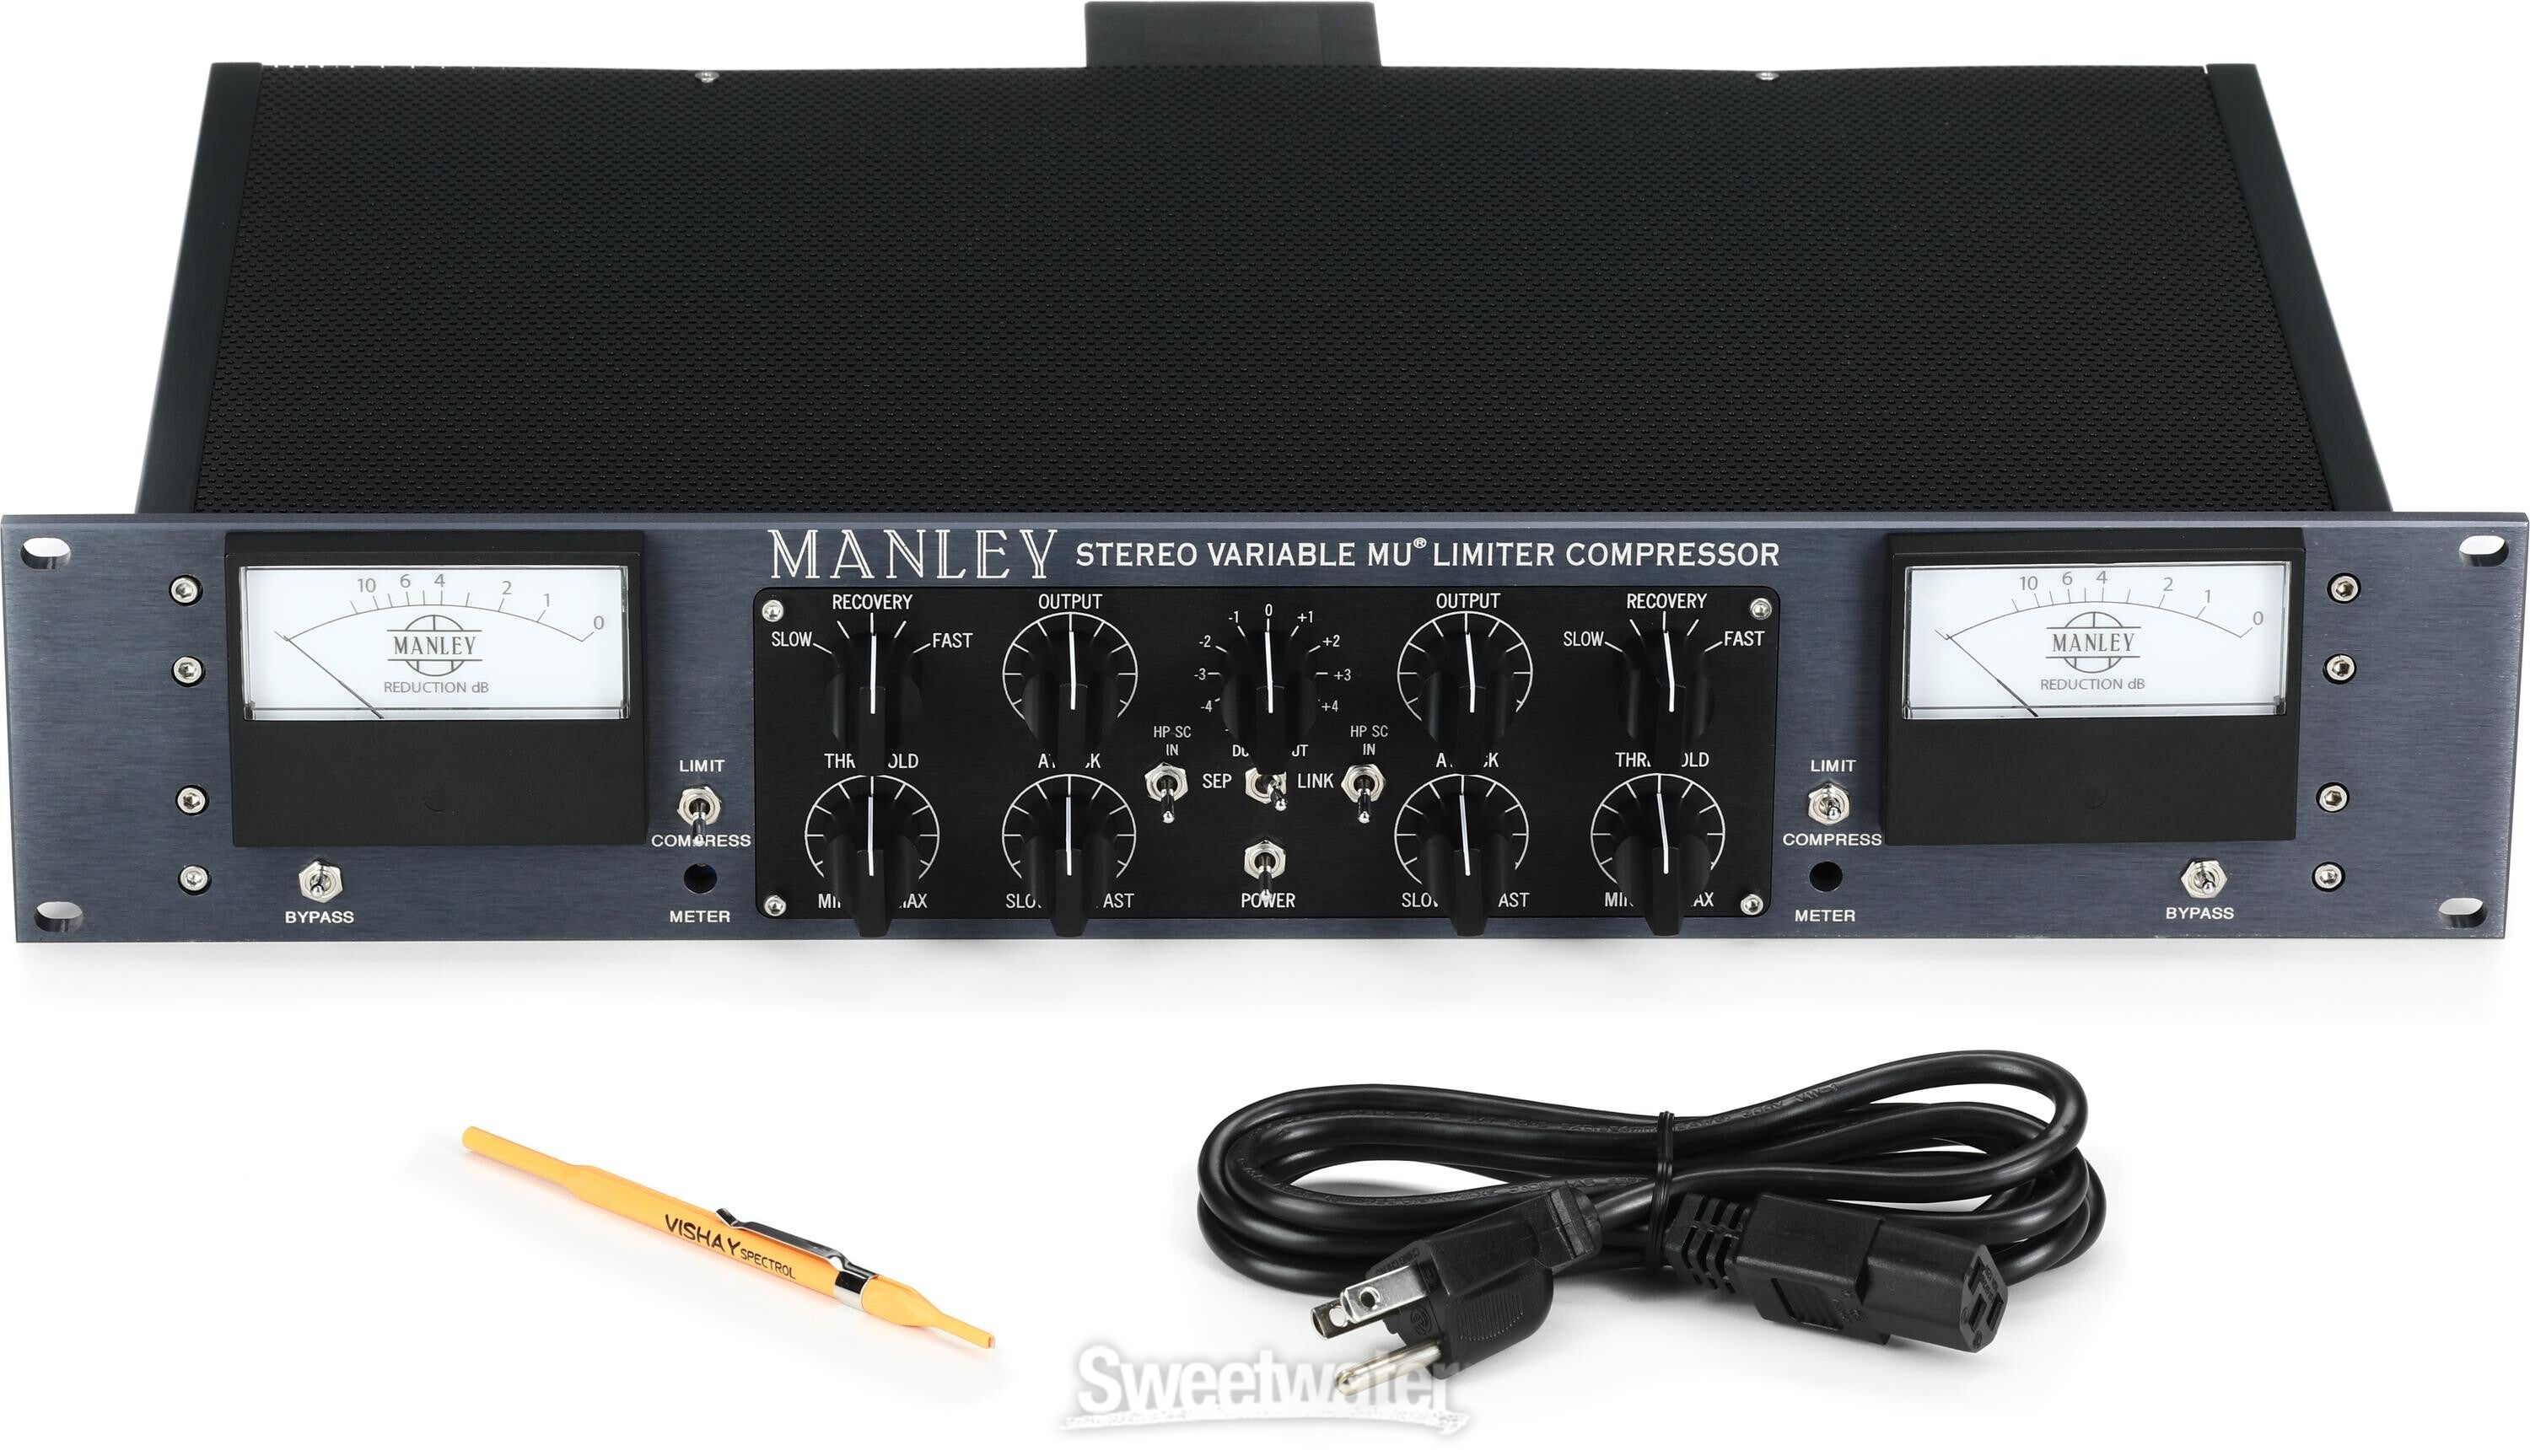 Manley Variable Mu Stereo Compressor Limiter | Sweetwater